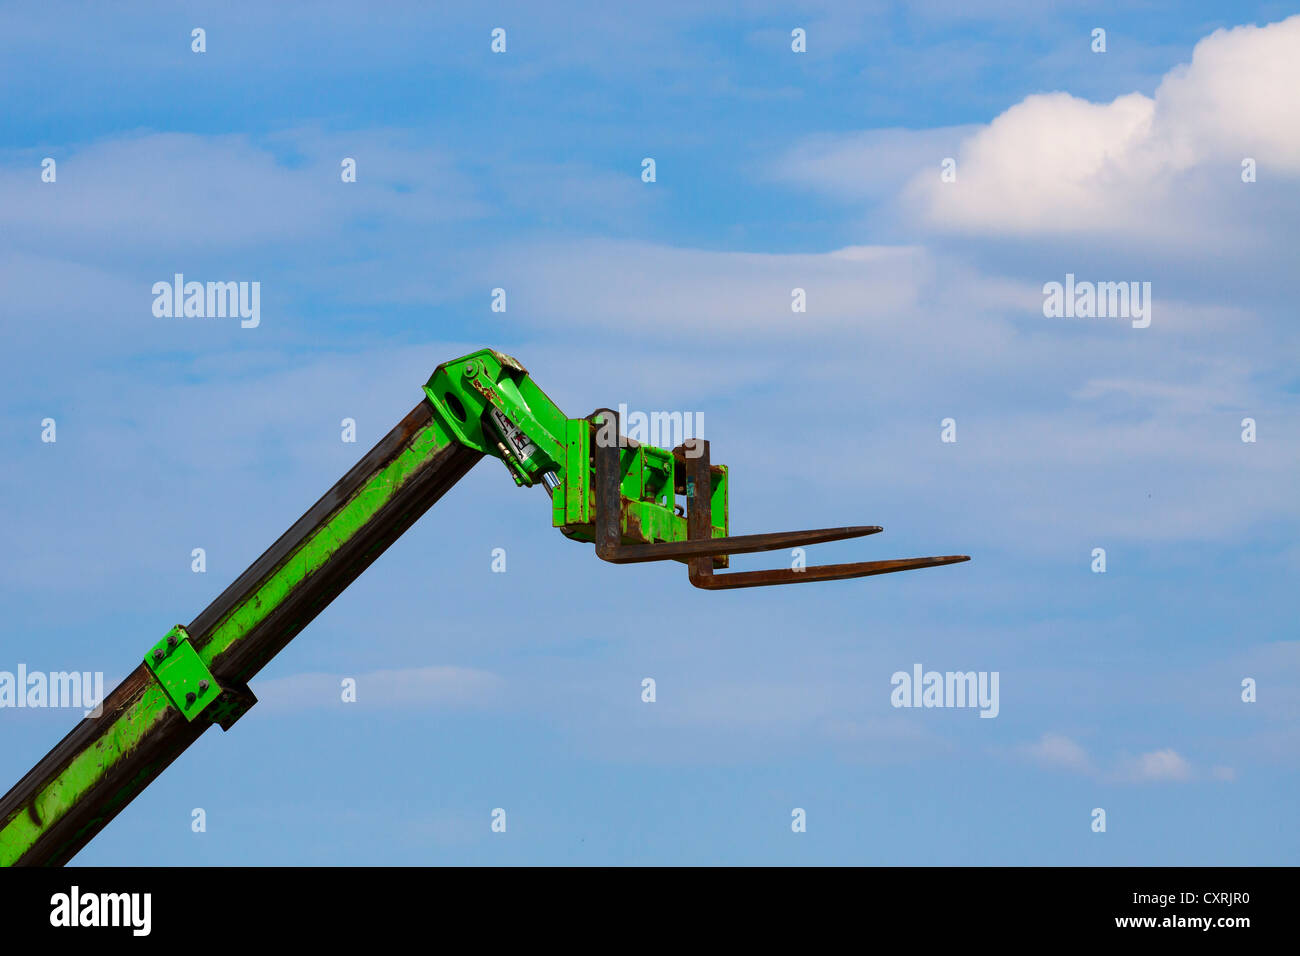 Forklift truck against a blue sky, Berlin, Germany, Europe Stock Photo